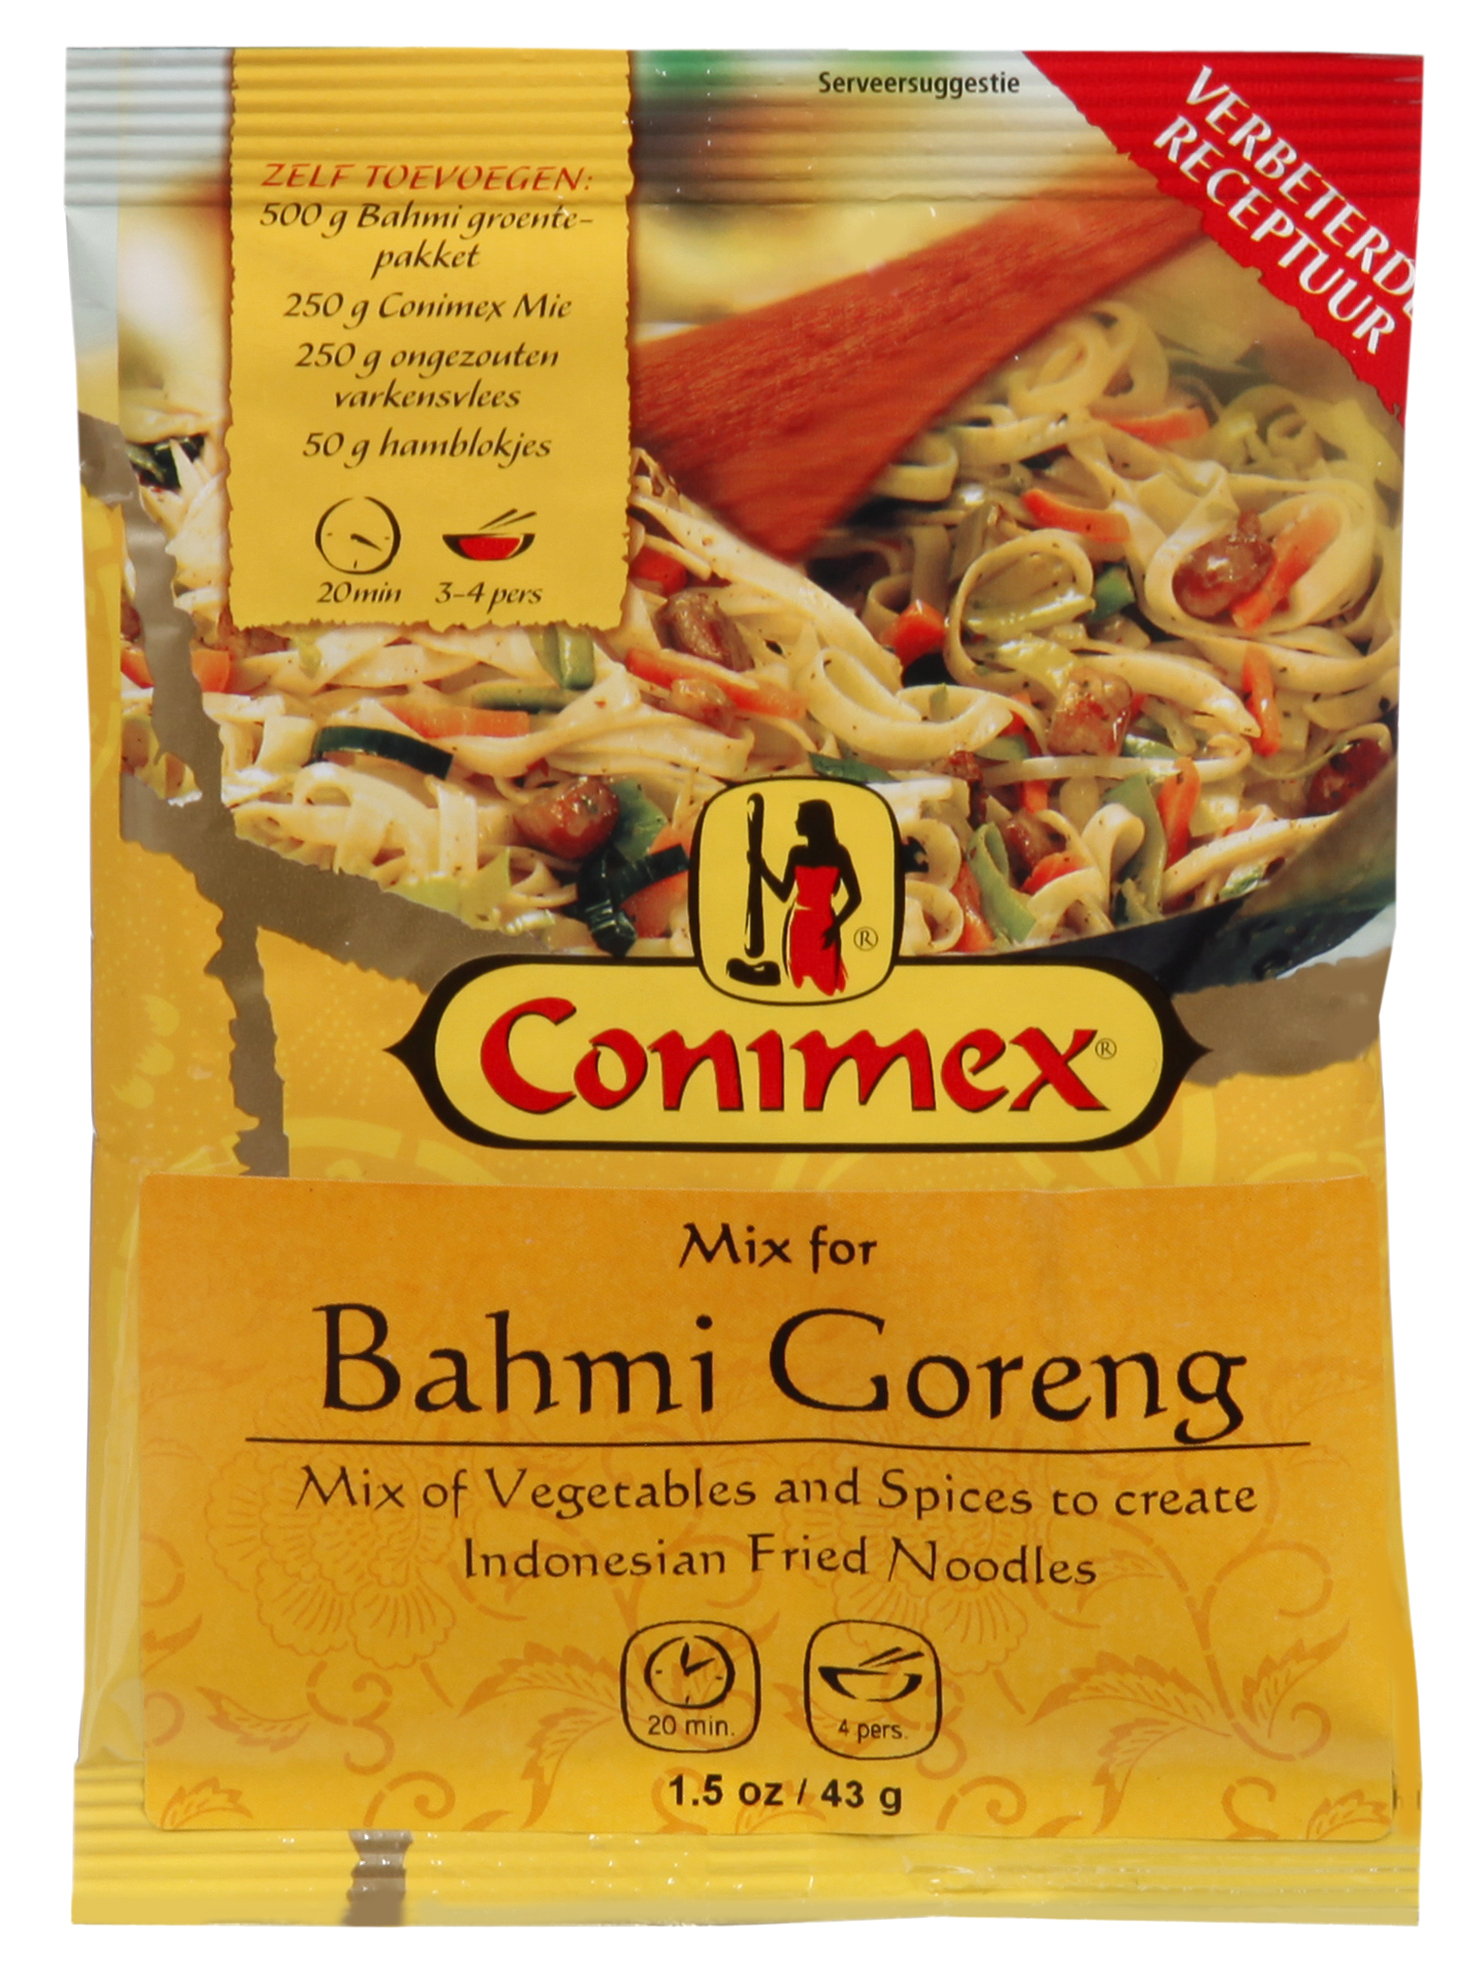 Conimex Bahmi Goreng from http://www.thedutchstore.com